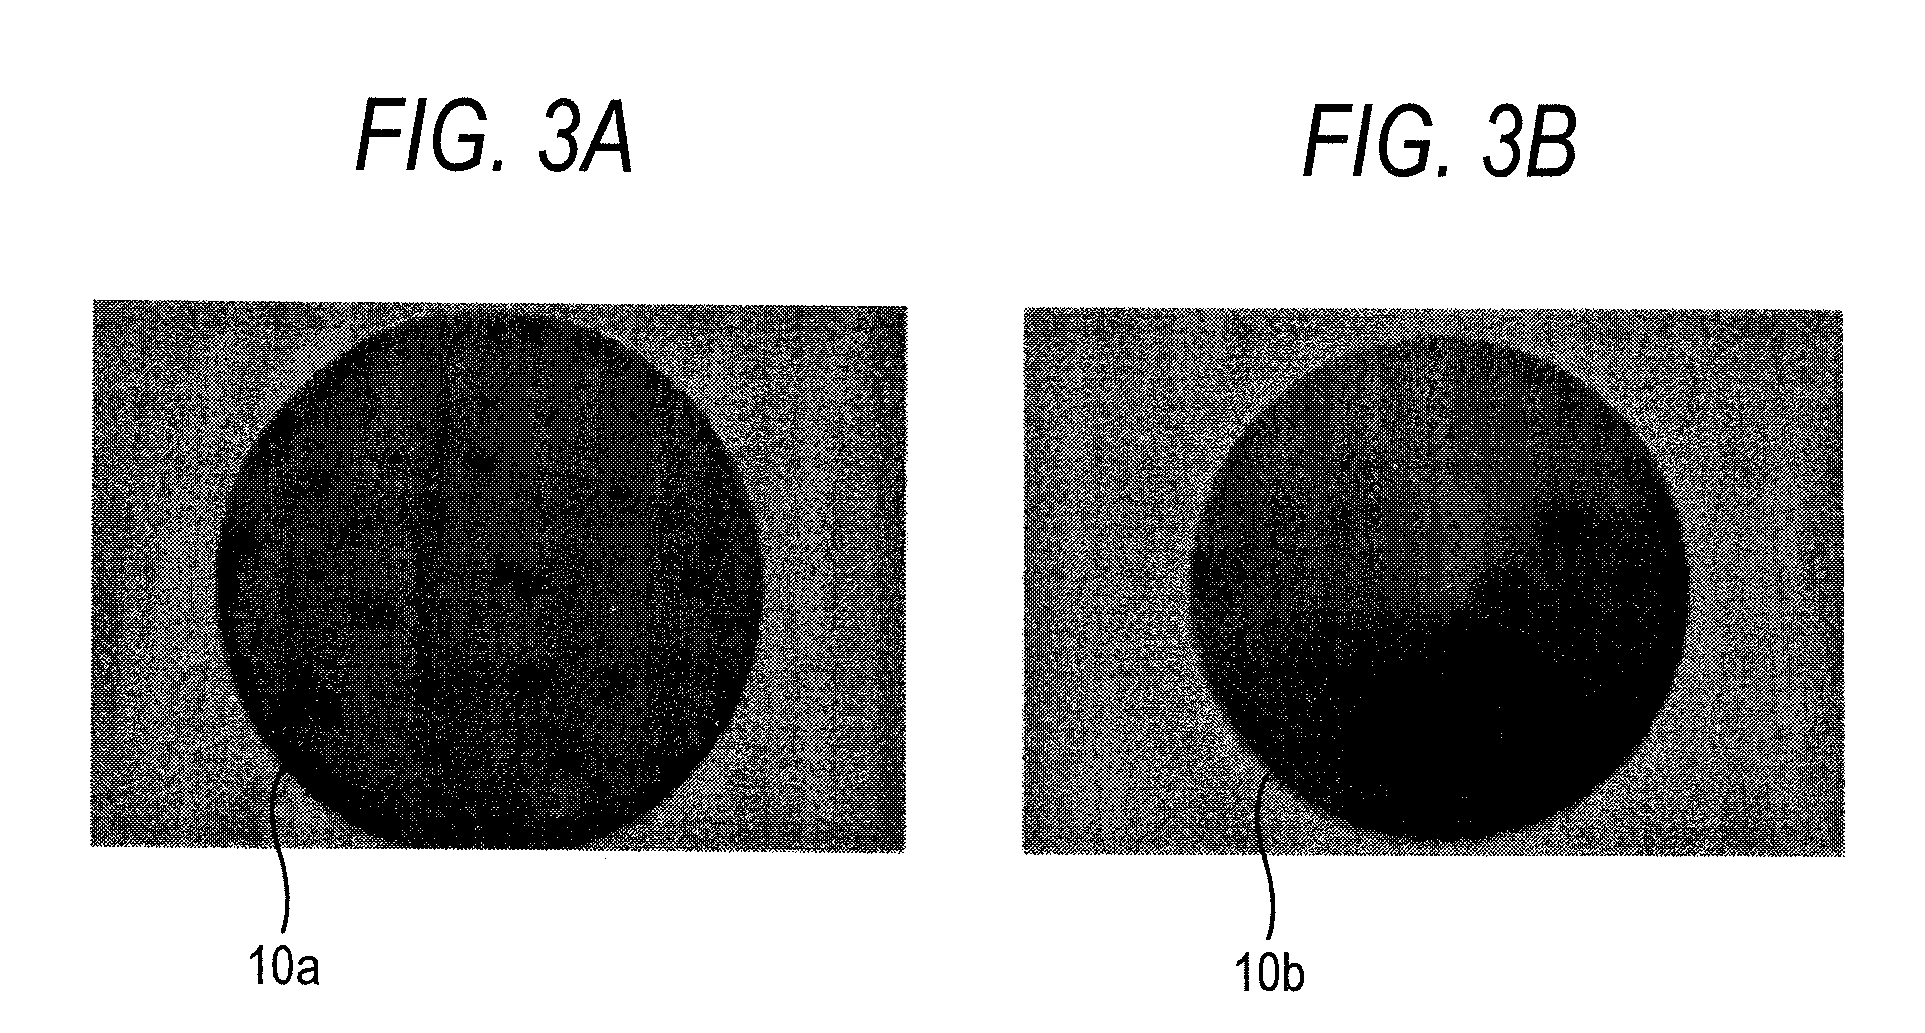 Cell structure of direct-flame fuel cell